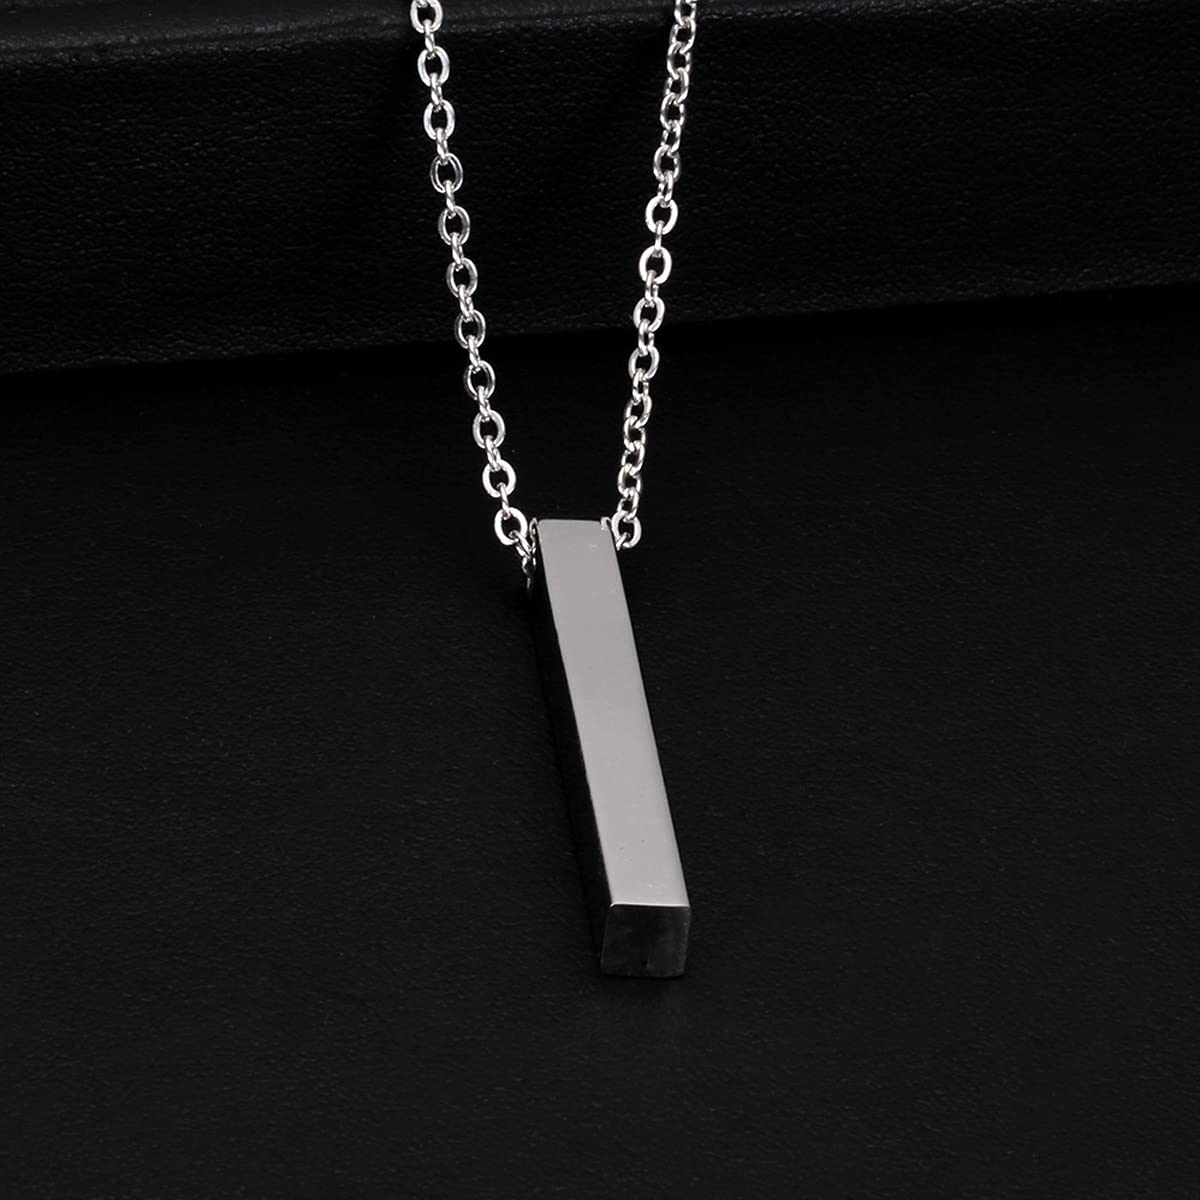 Yellow Chimes Pendant for Men and Boys Silver & Black Bar Pendants For Men |Silver & Black Bar Shape Pendants with Chian for Men| Birthday Gift for Men and Boys Anniversary Gift for Husband